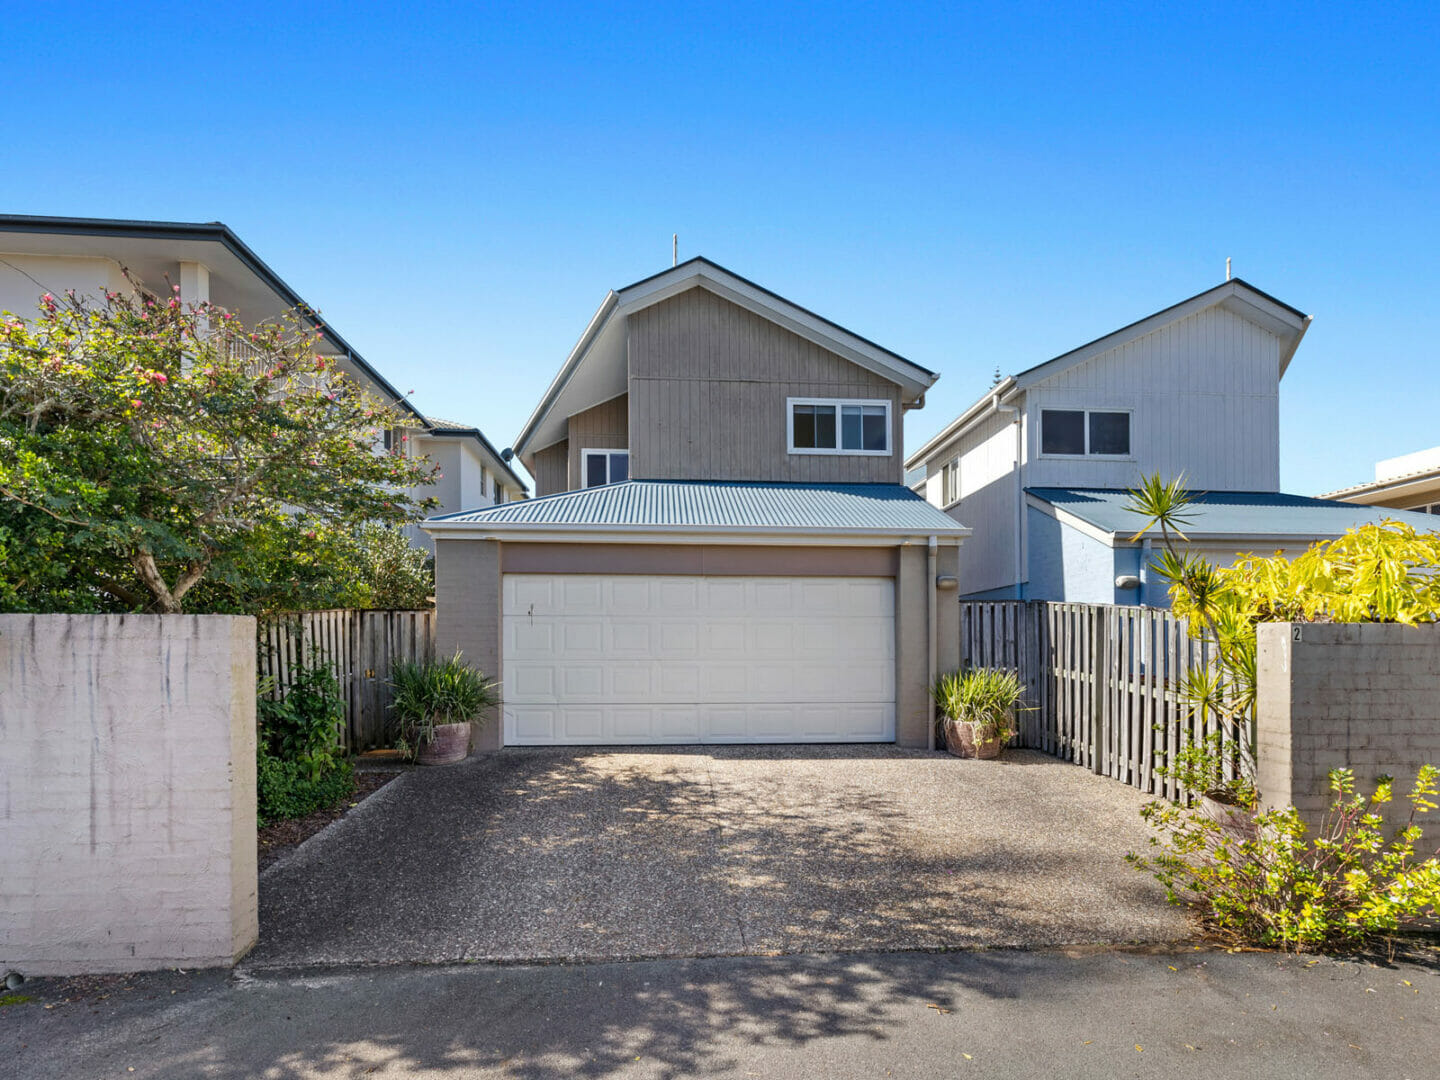 Two storey townhouse with lock up garage under and driveway